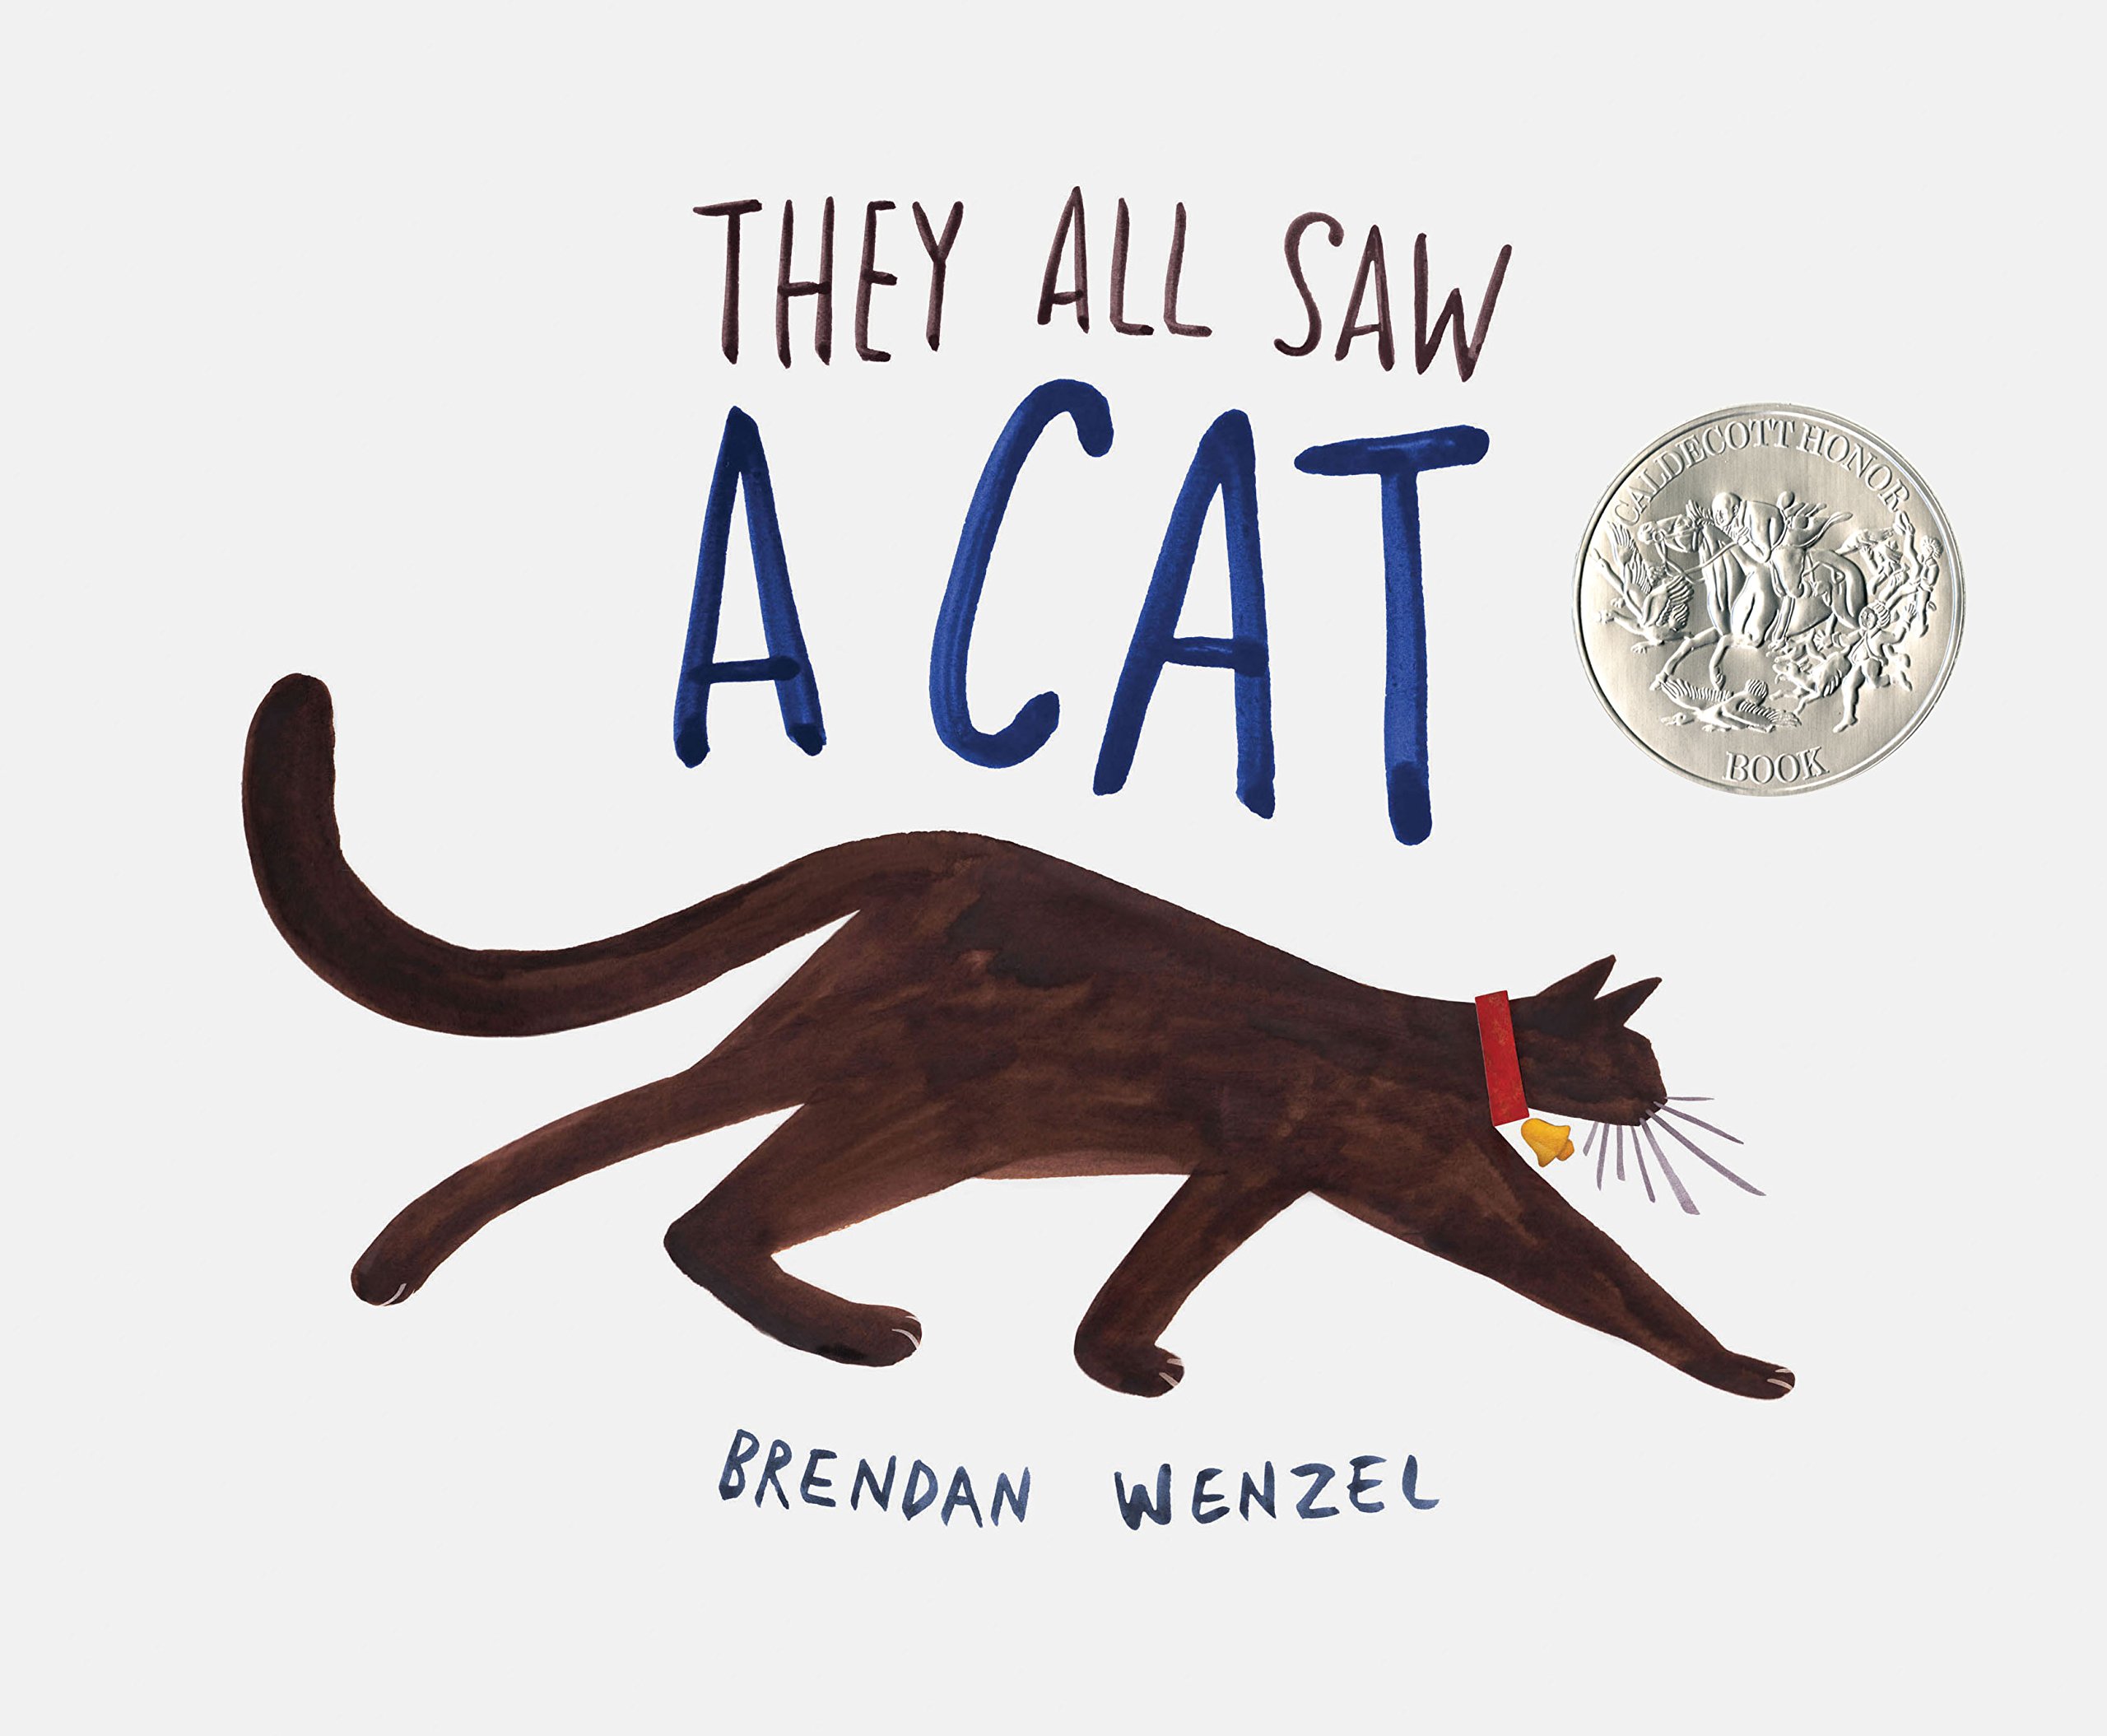 They All Saw a Cat by Brendan Wenzel book cover